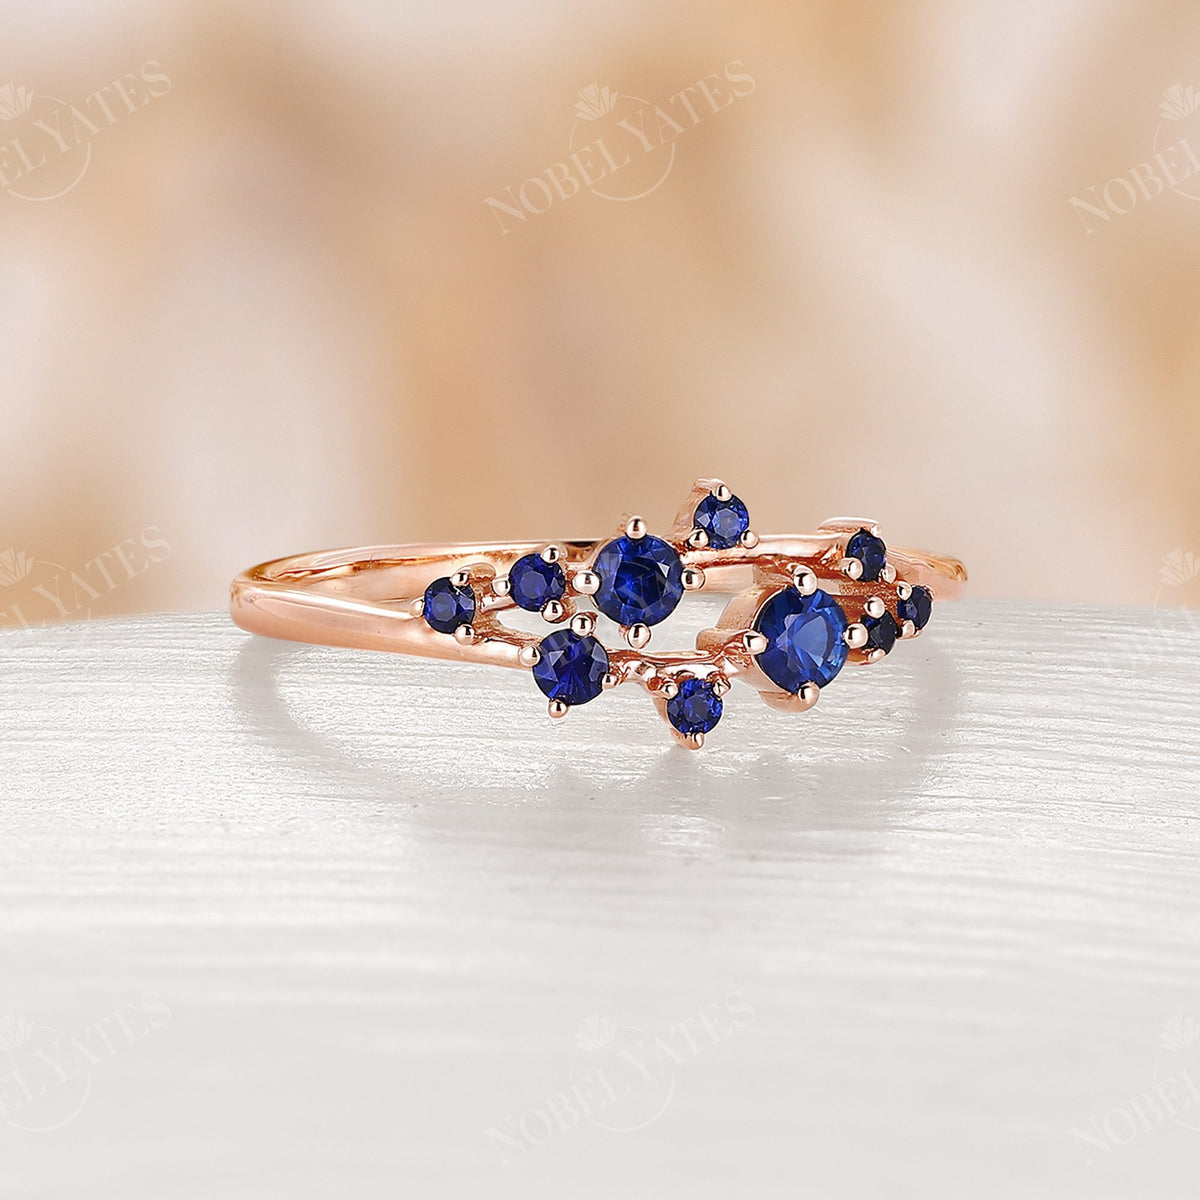 Vintage Round Cut Natural Sapphire Cluster Engagement Ring Rose Gold